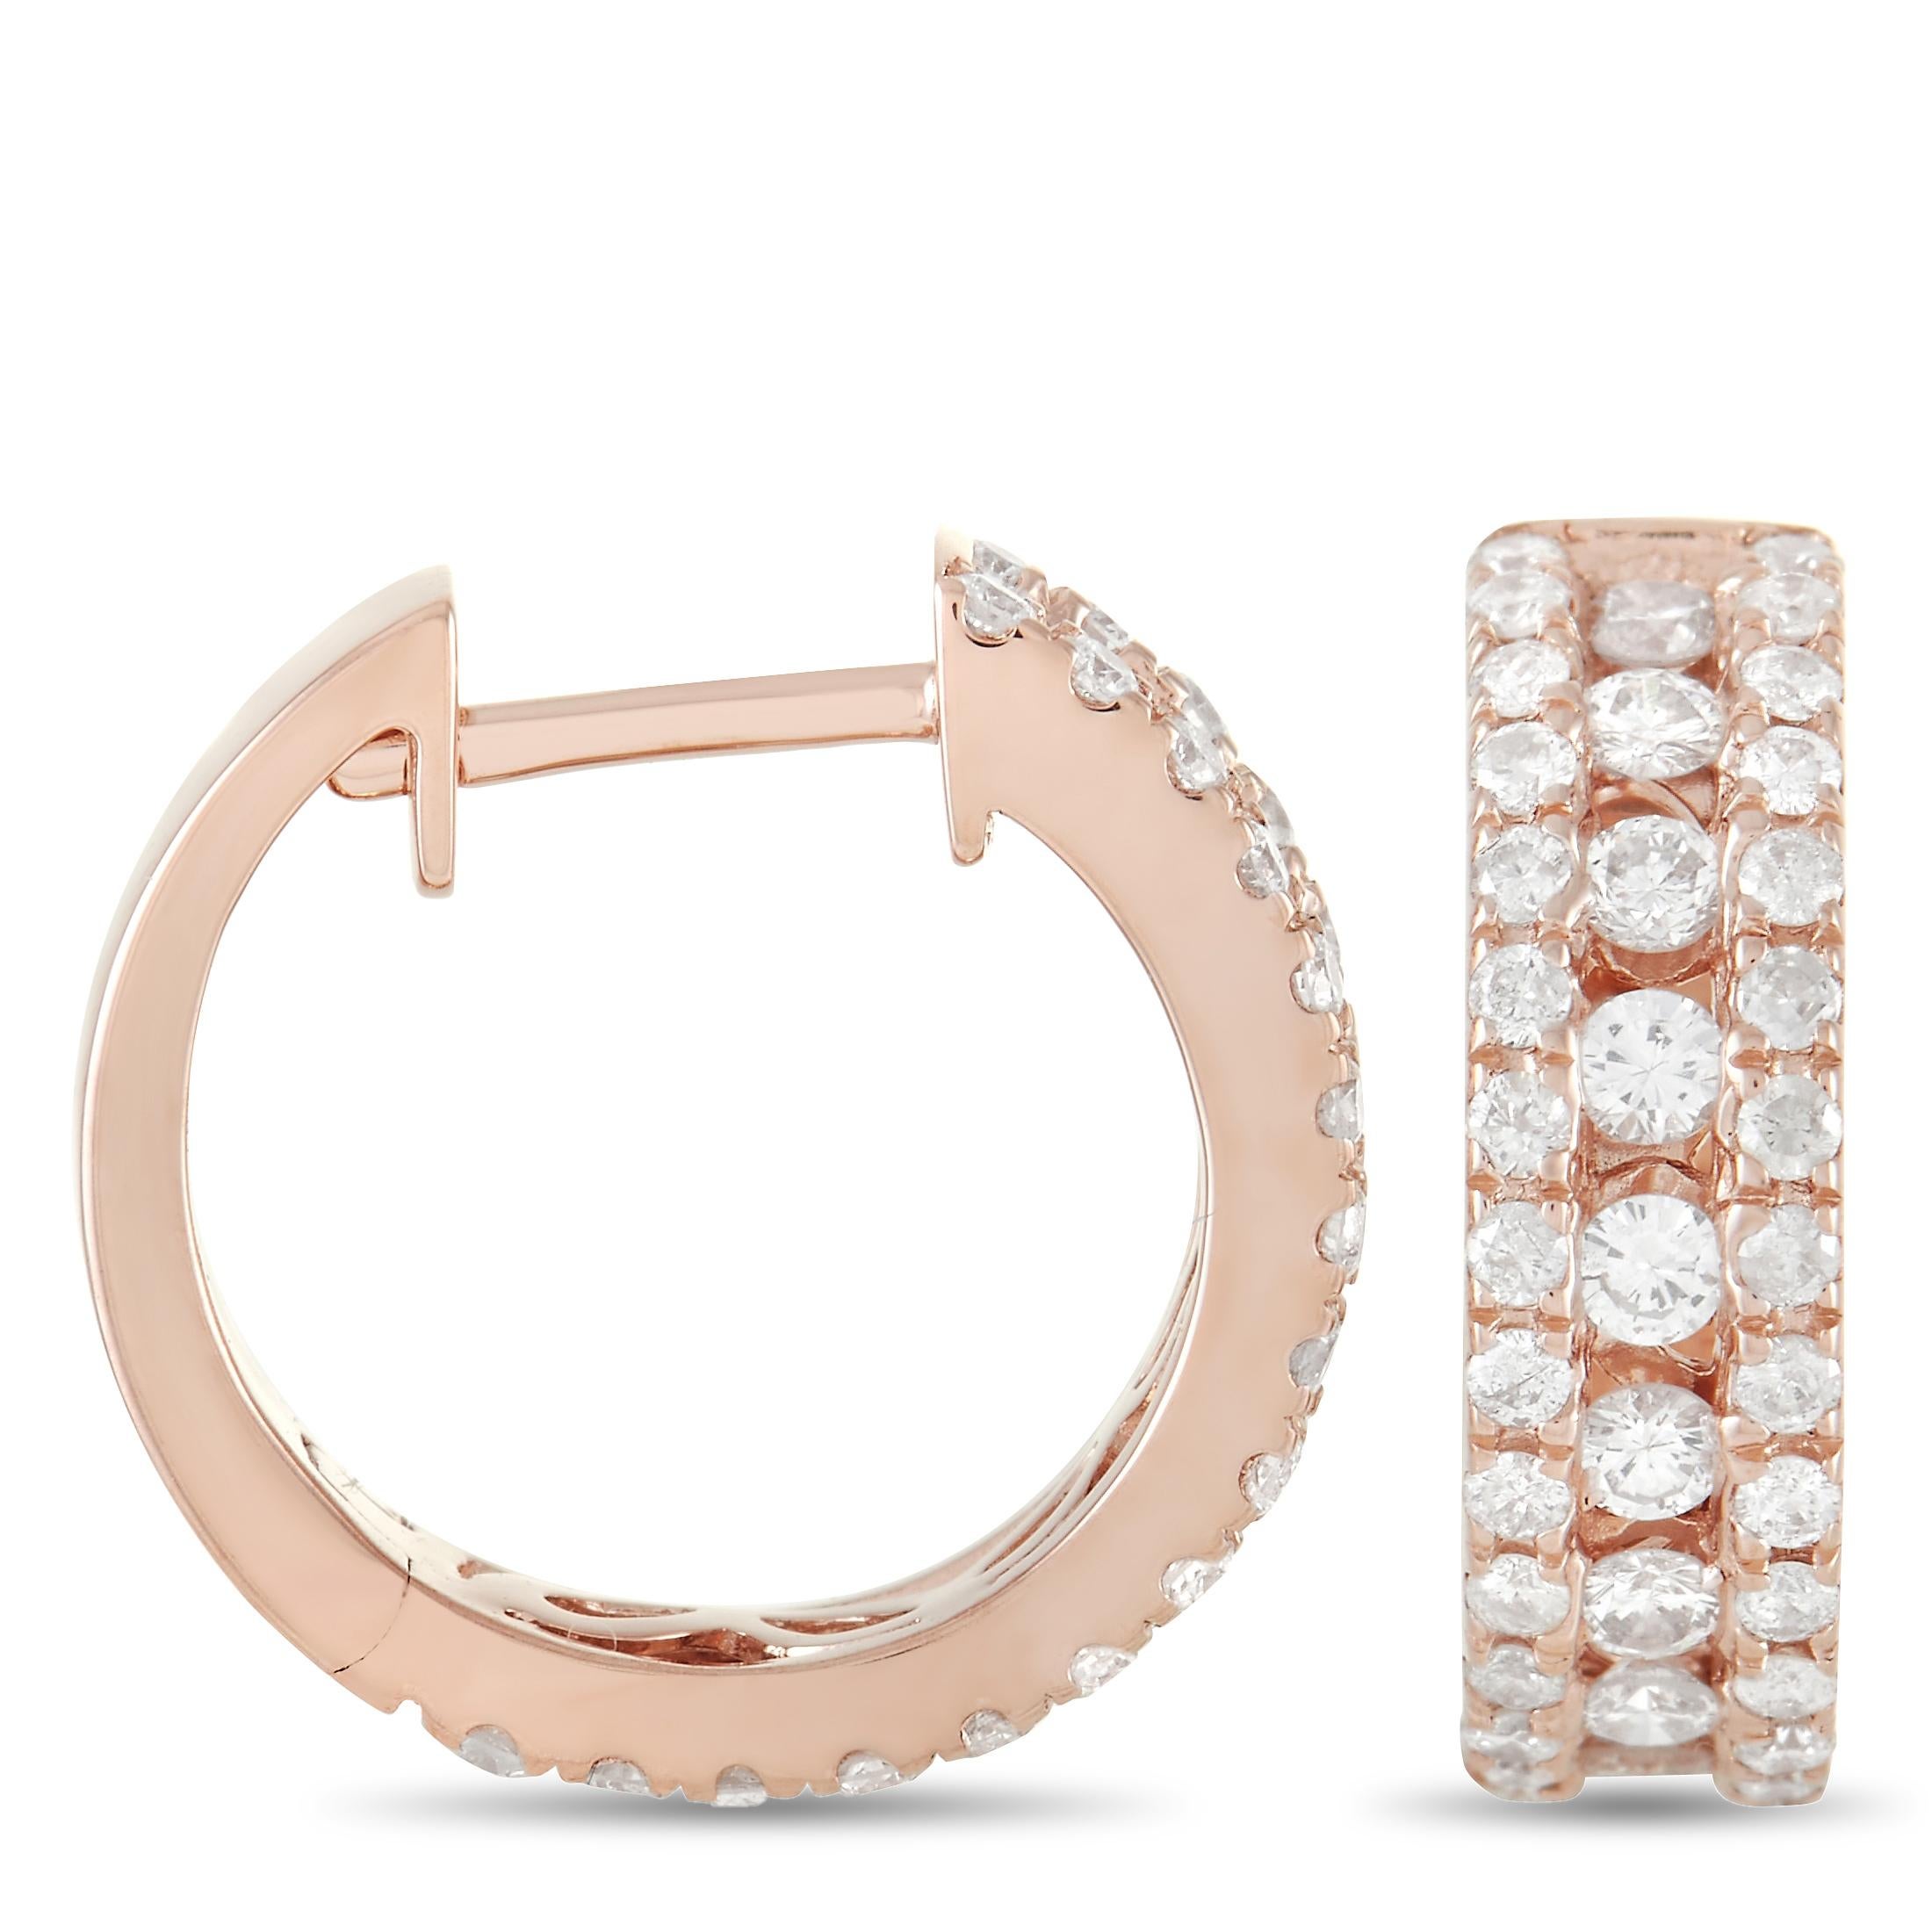 These stylish hoop earrings will sparkle and shine every time they catch the light. On these earrings - which measure .5” round - a warm 14K Rose Gold setting provides the perfect foundation for diamonds totaling 1.0 carats. 